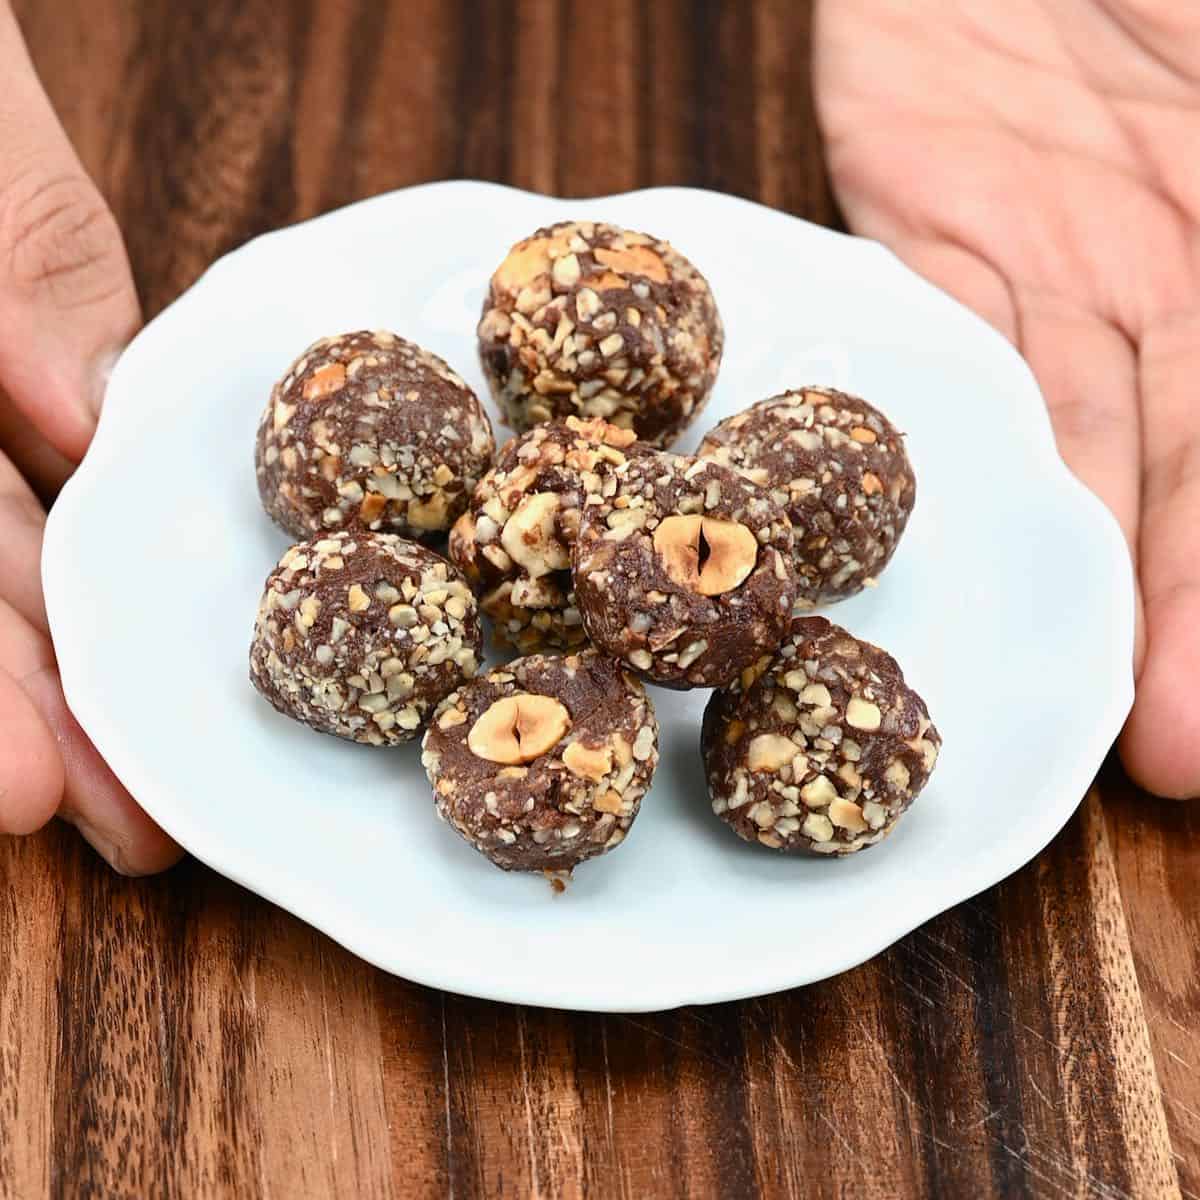 A plate with homemade Ferrero Rocher